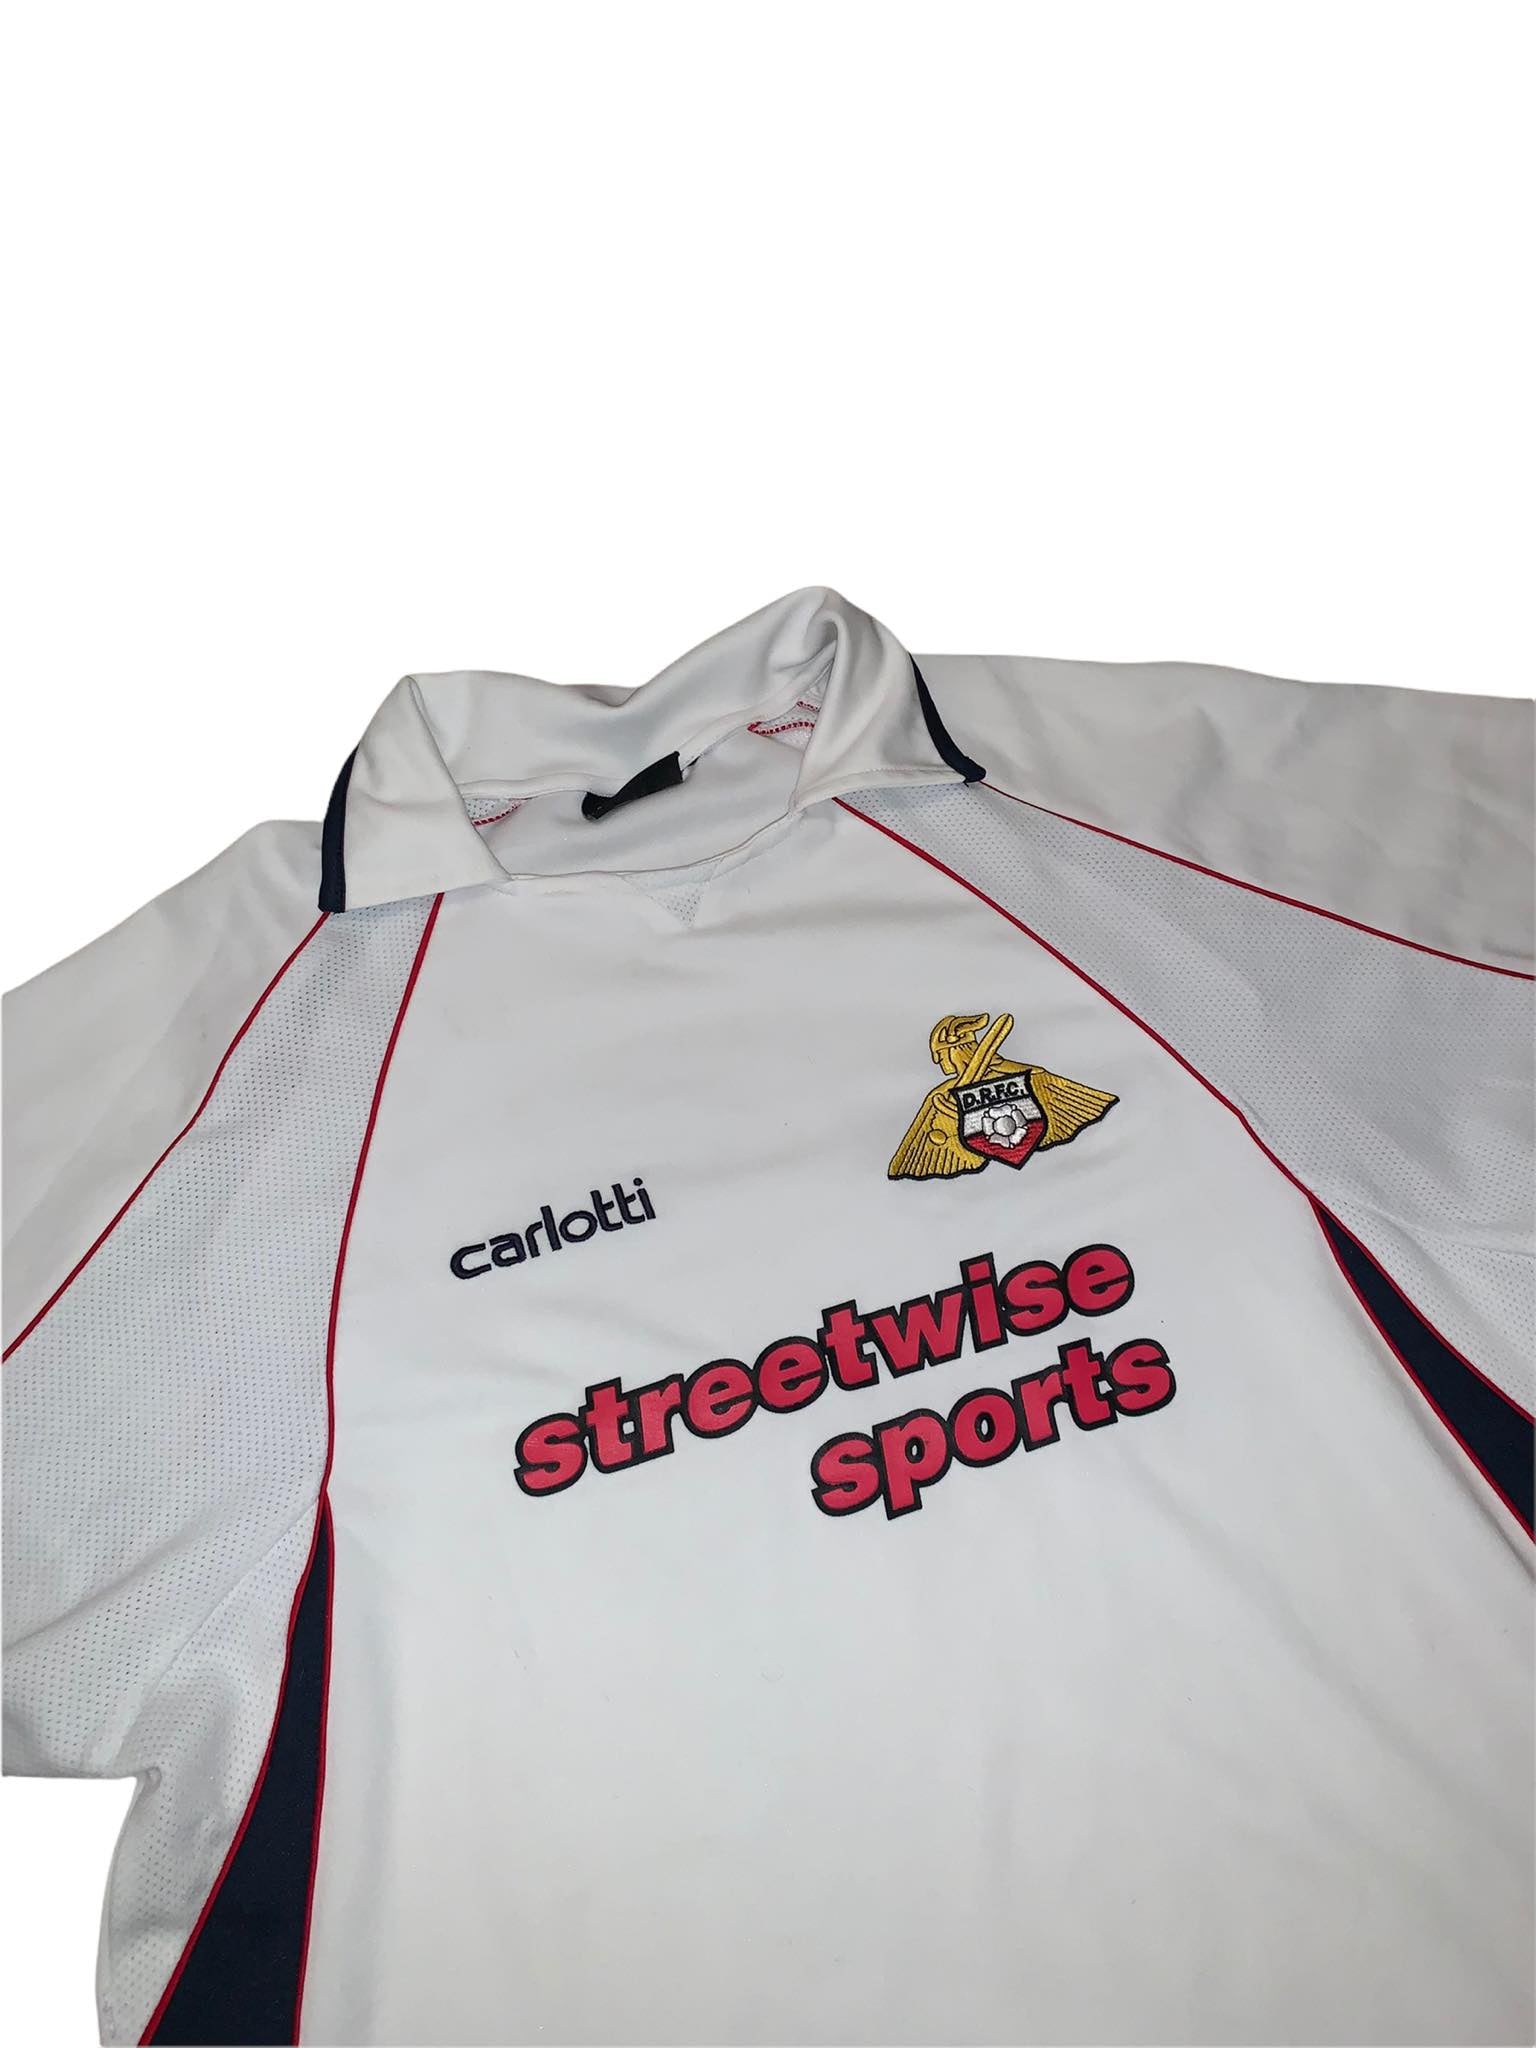 Doncaster Rovers 2004/05 Away Shirt (XL) - KITLAUNCH